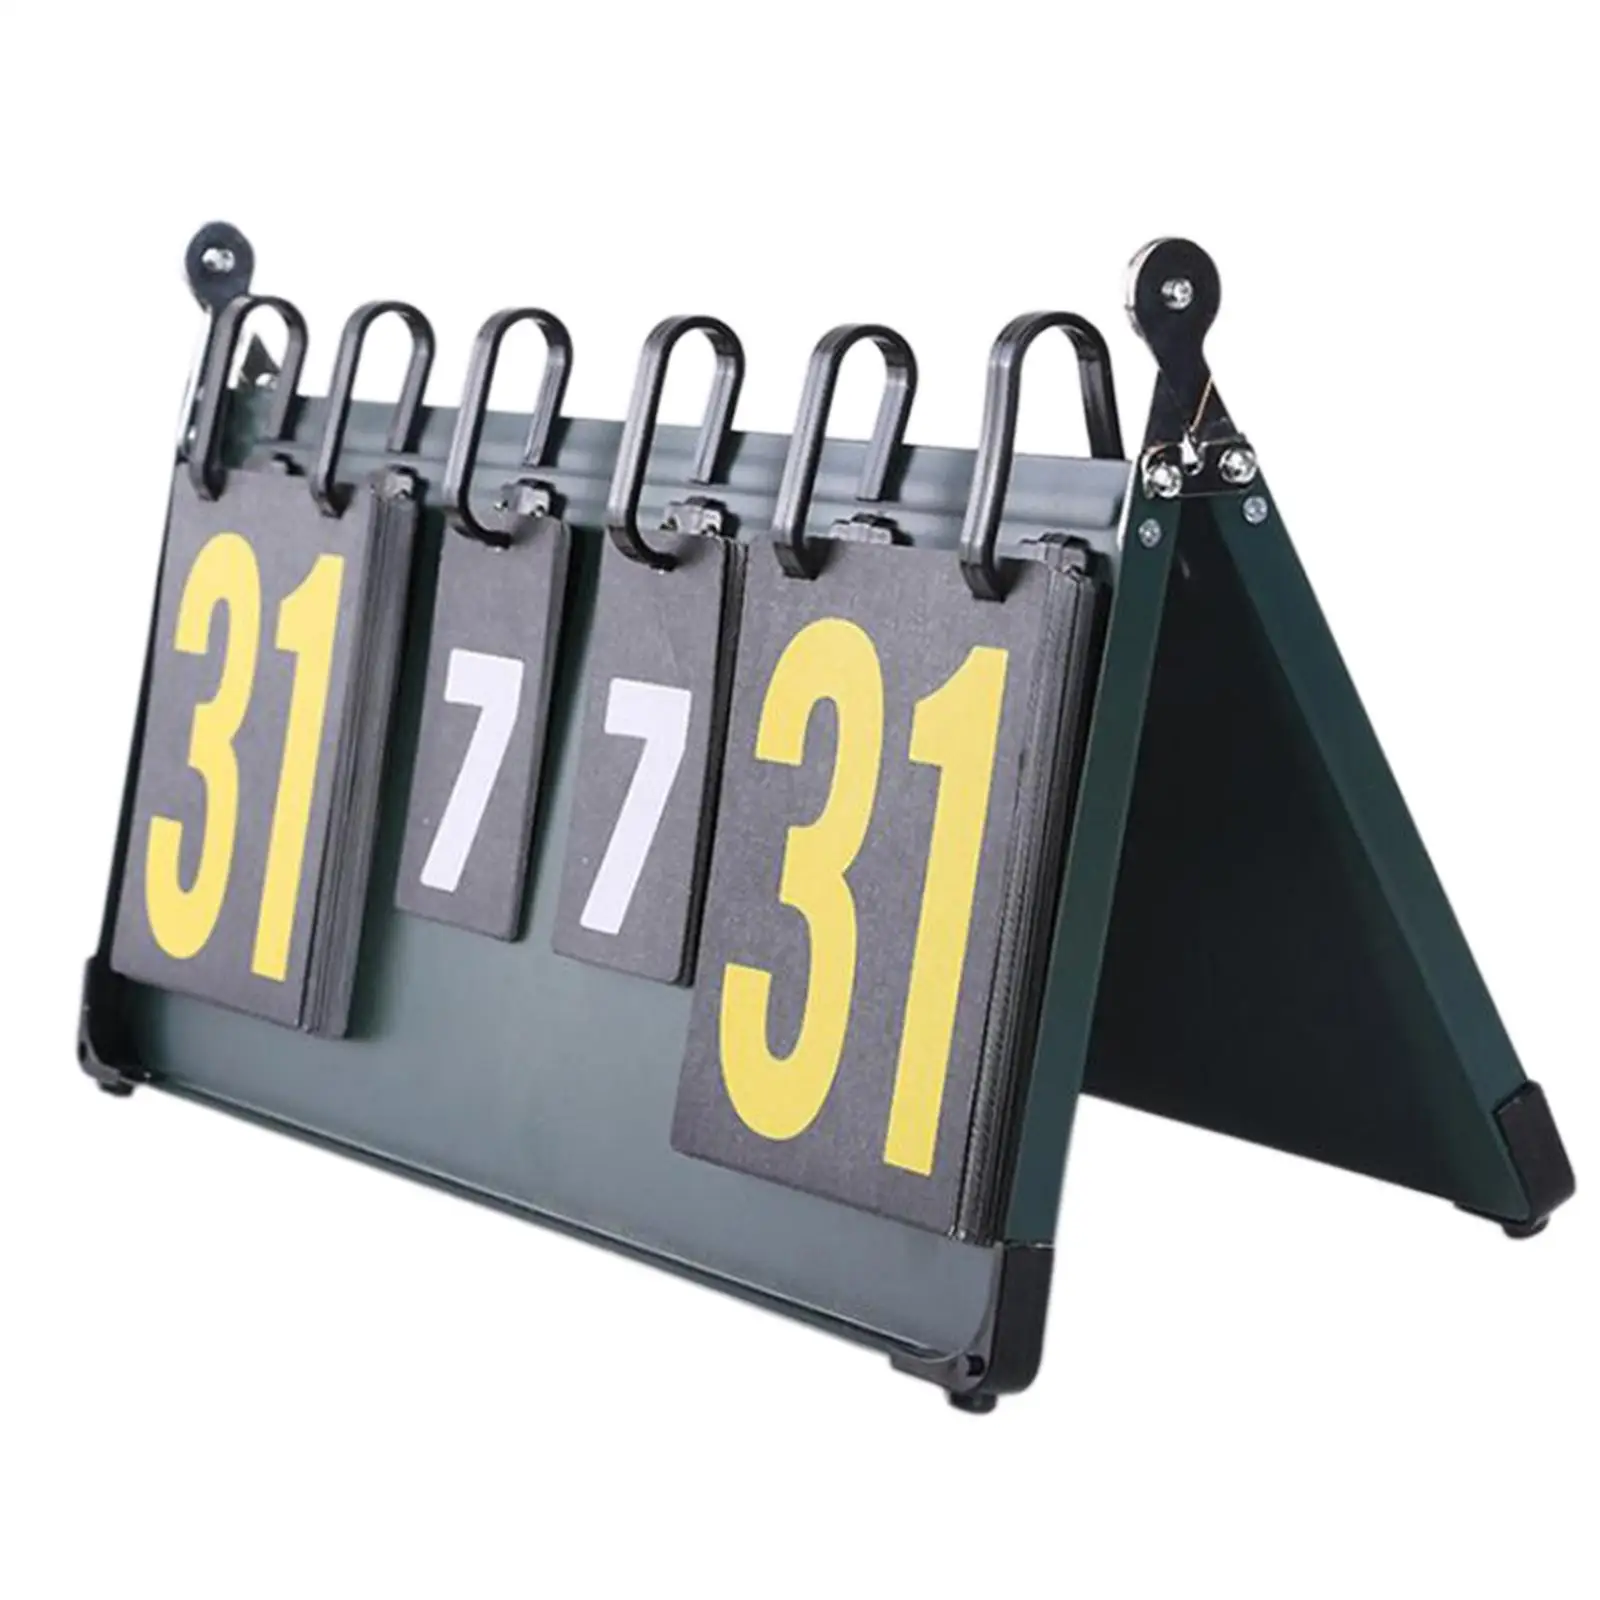 Portable Table Scoreboard Score Keeper for Basketball Indoor Sports